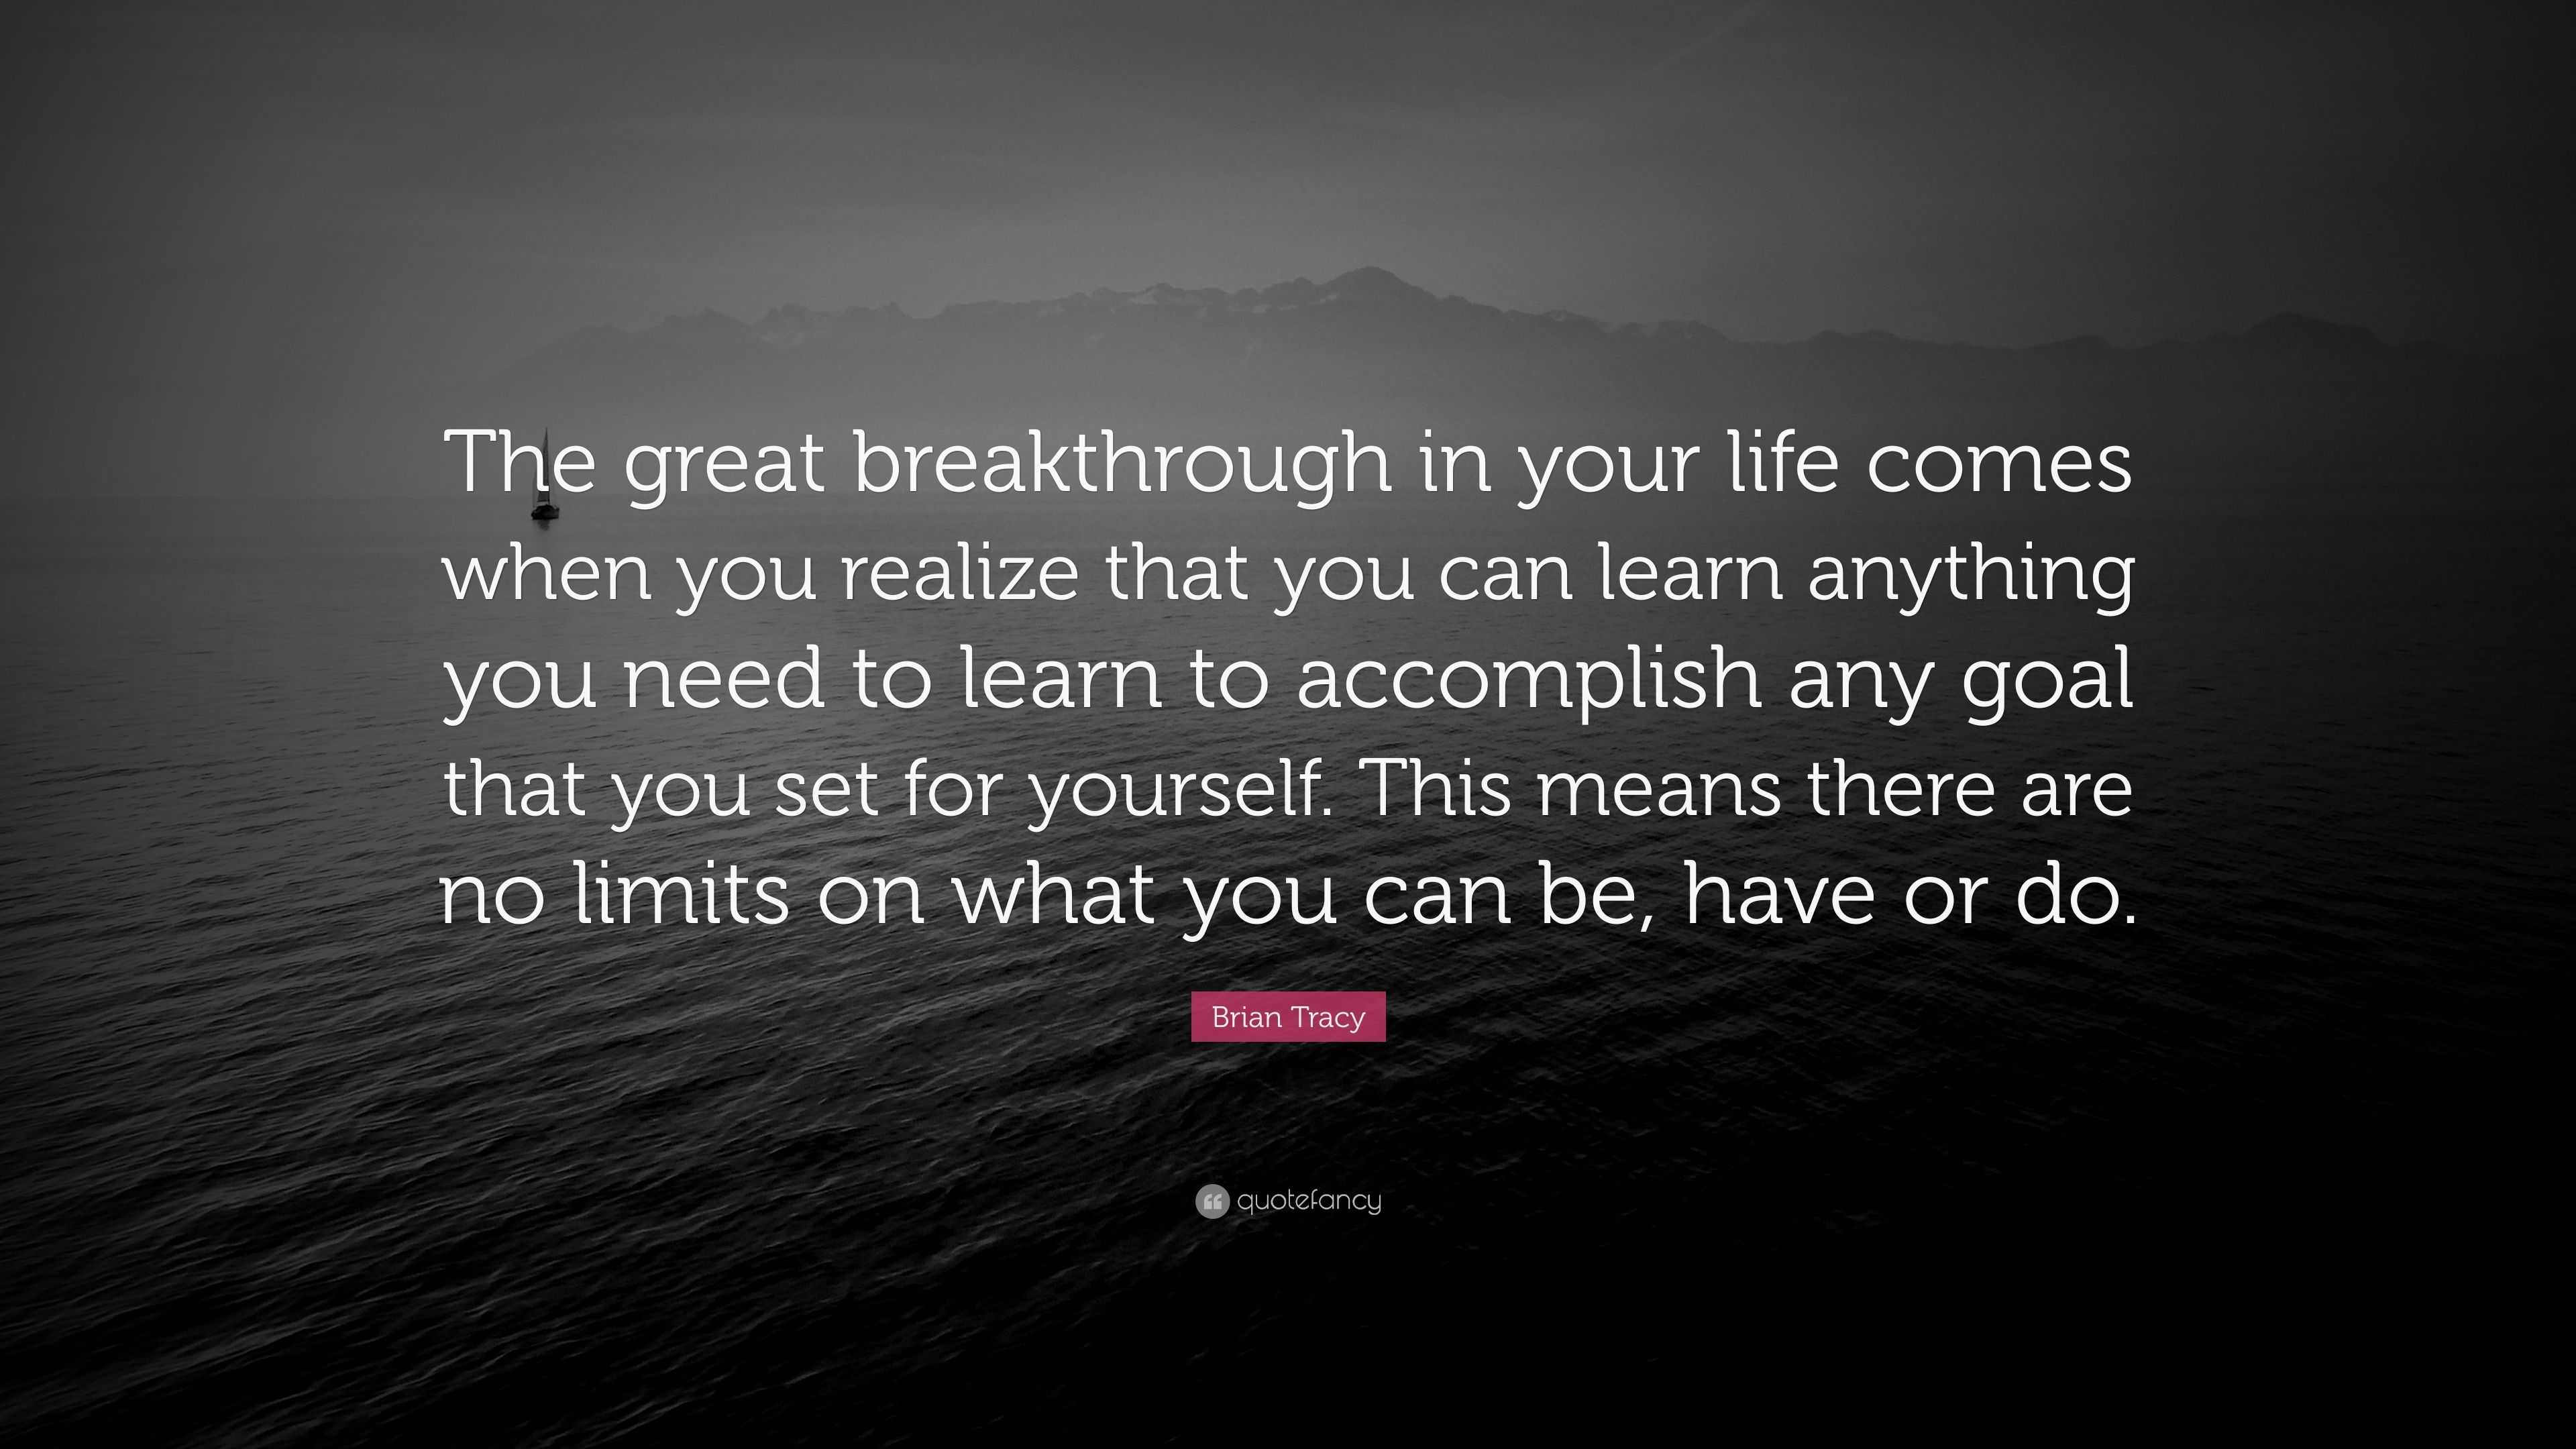 Brian Tracy Quote: “The great breakthrough in your life comes when you ...